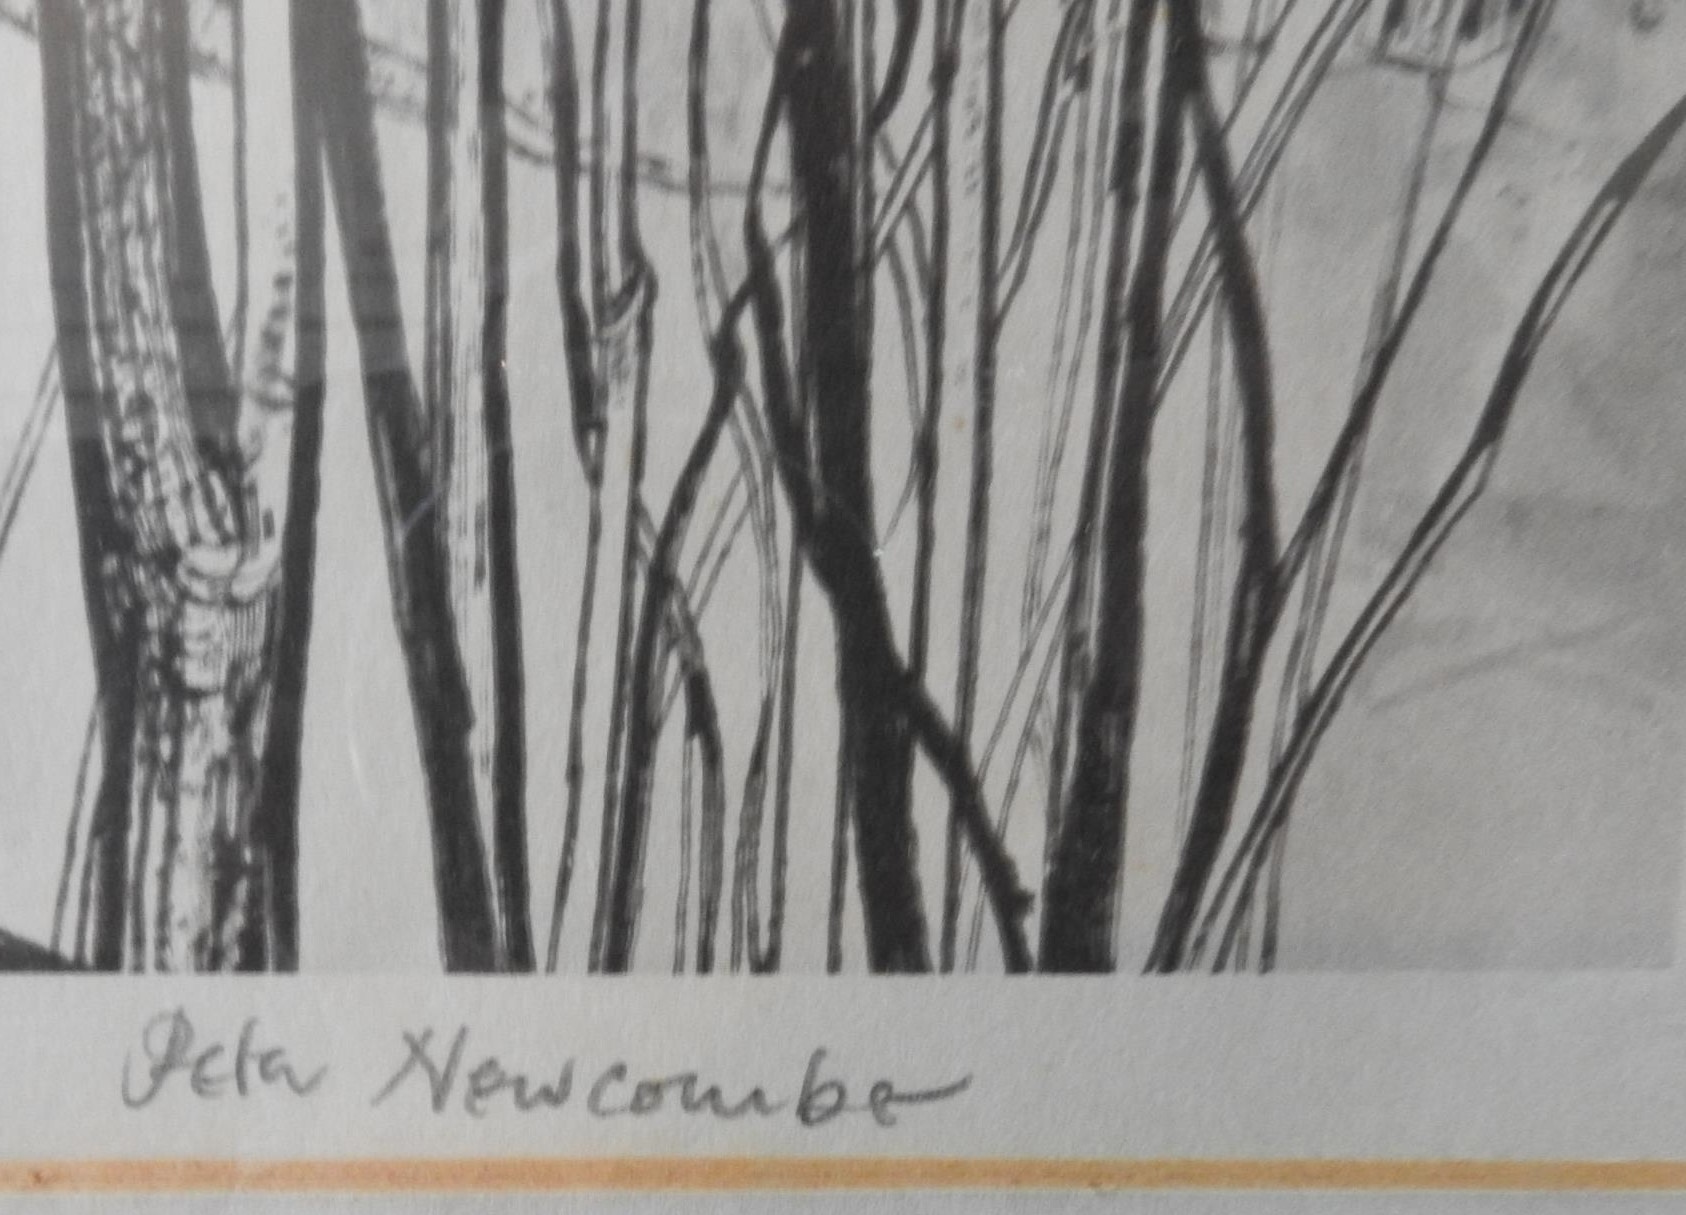 SIGNED AND NUMBERED WINTER SCENE MONOCHROME PRINT BY PETER , signed in pencil on lower edge and - Image 2 of 3